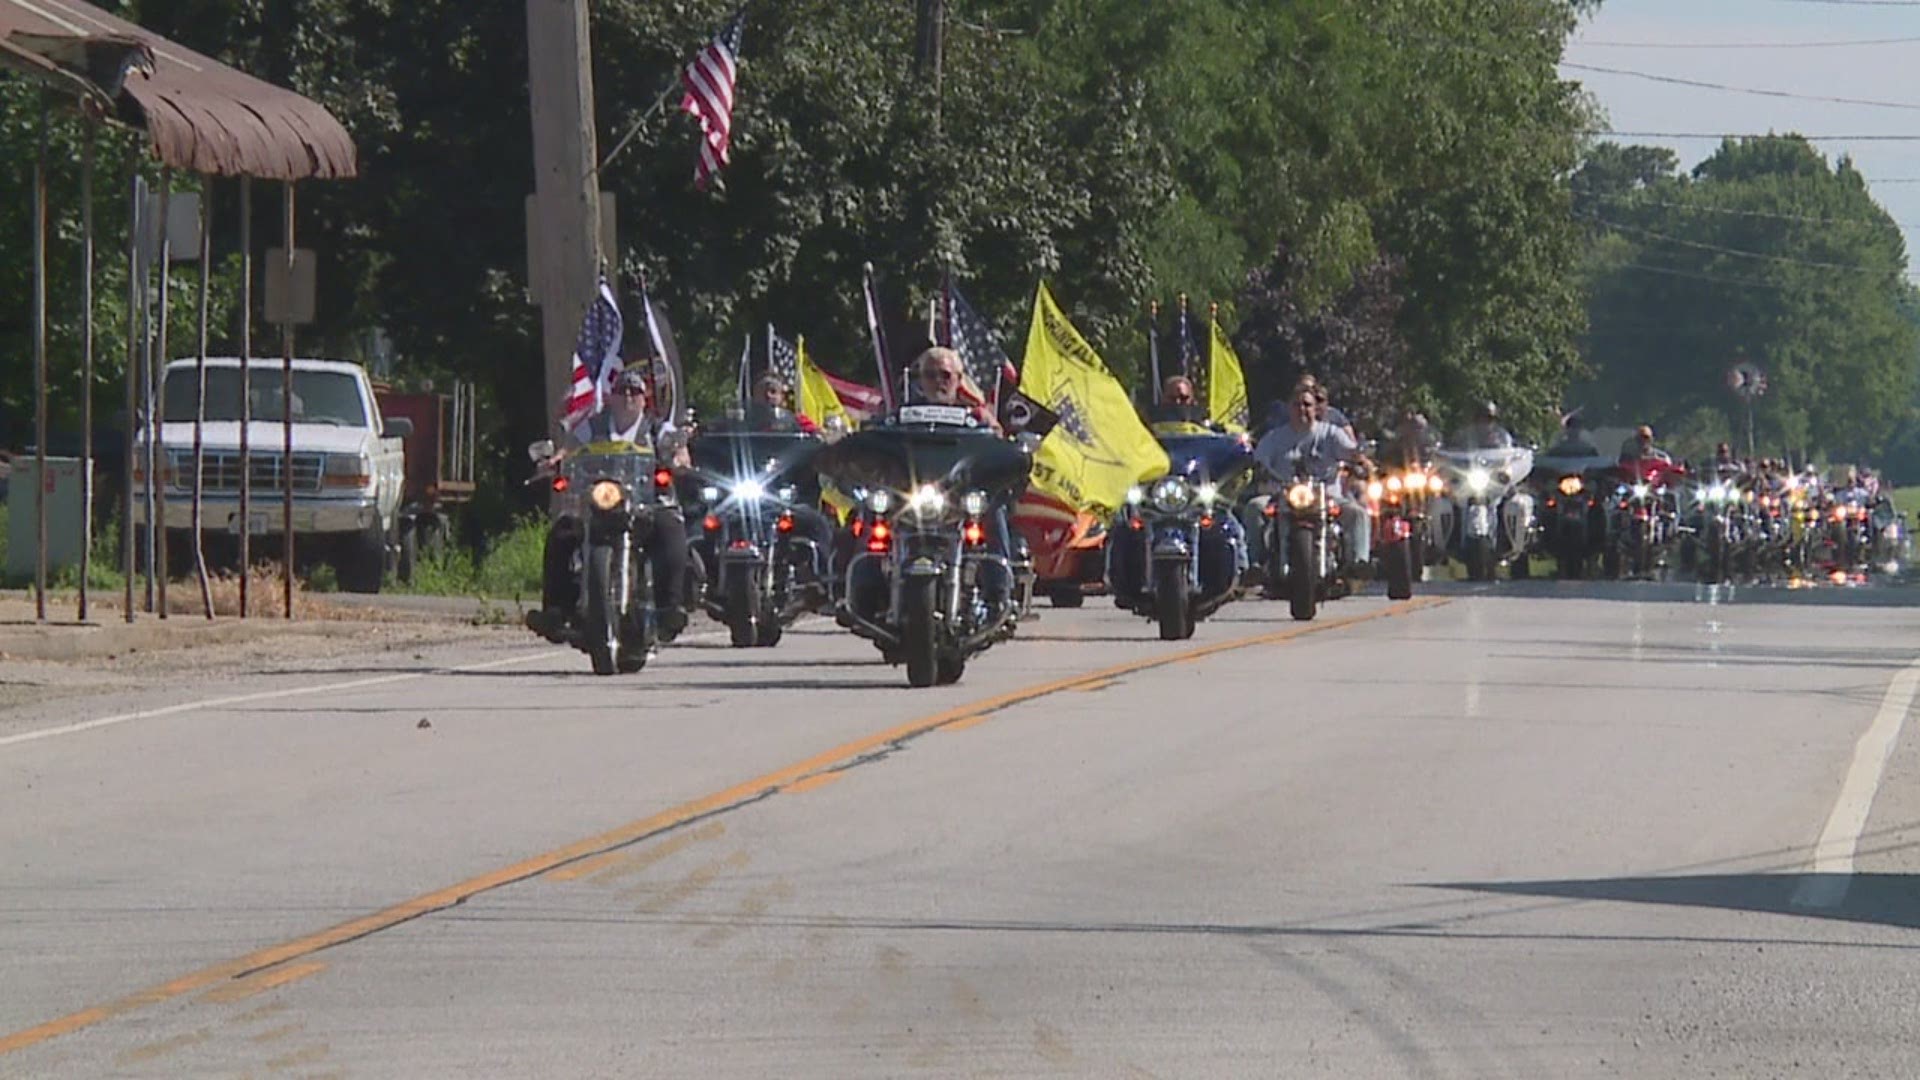 Nearly 100 bikers rode through Little York to pay tribute to Larry "The Flagman" Eckhardt with one final ride.